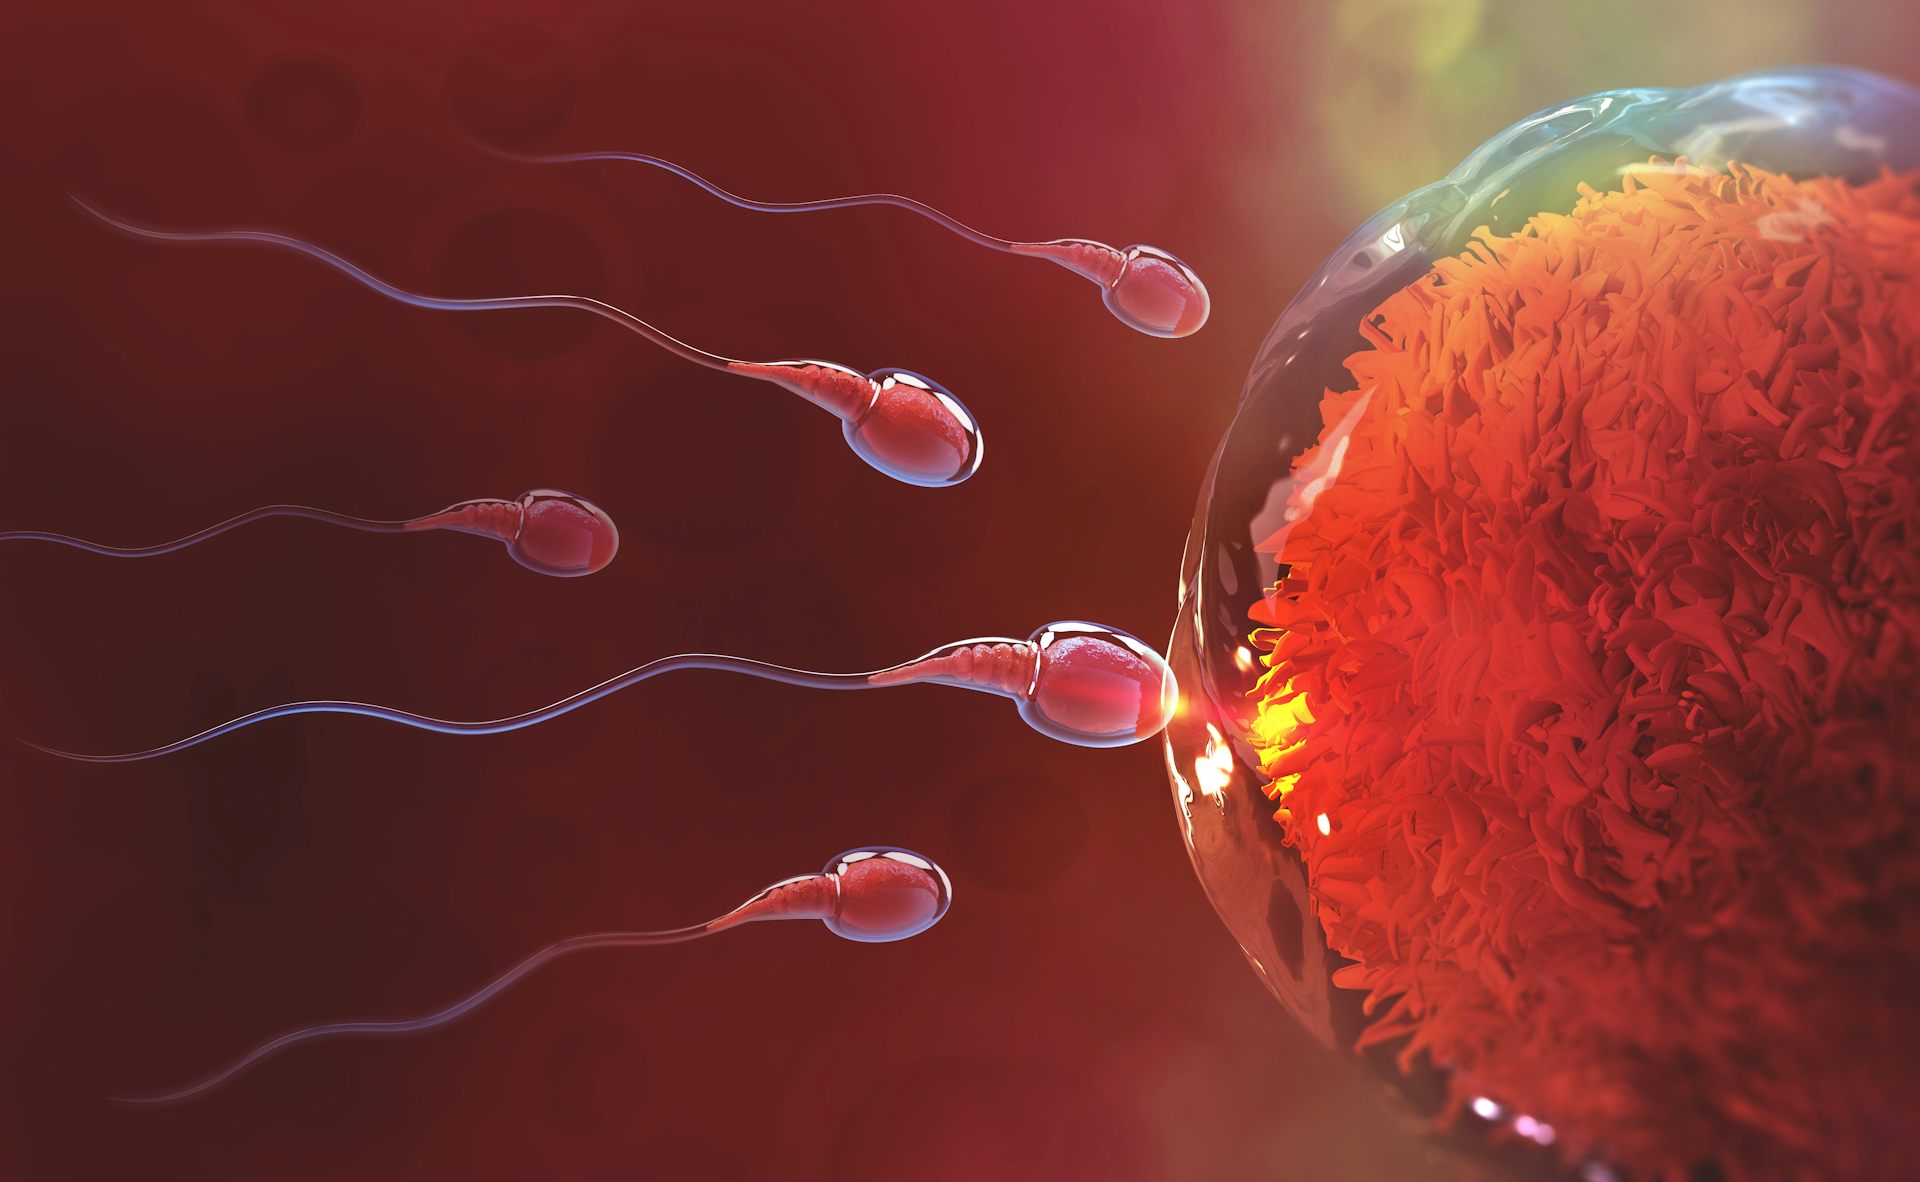 How we solved the mystery of the human sperm tail pic